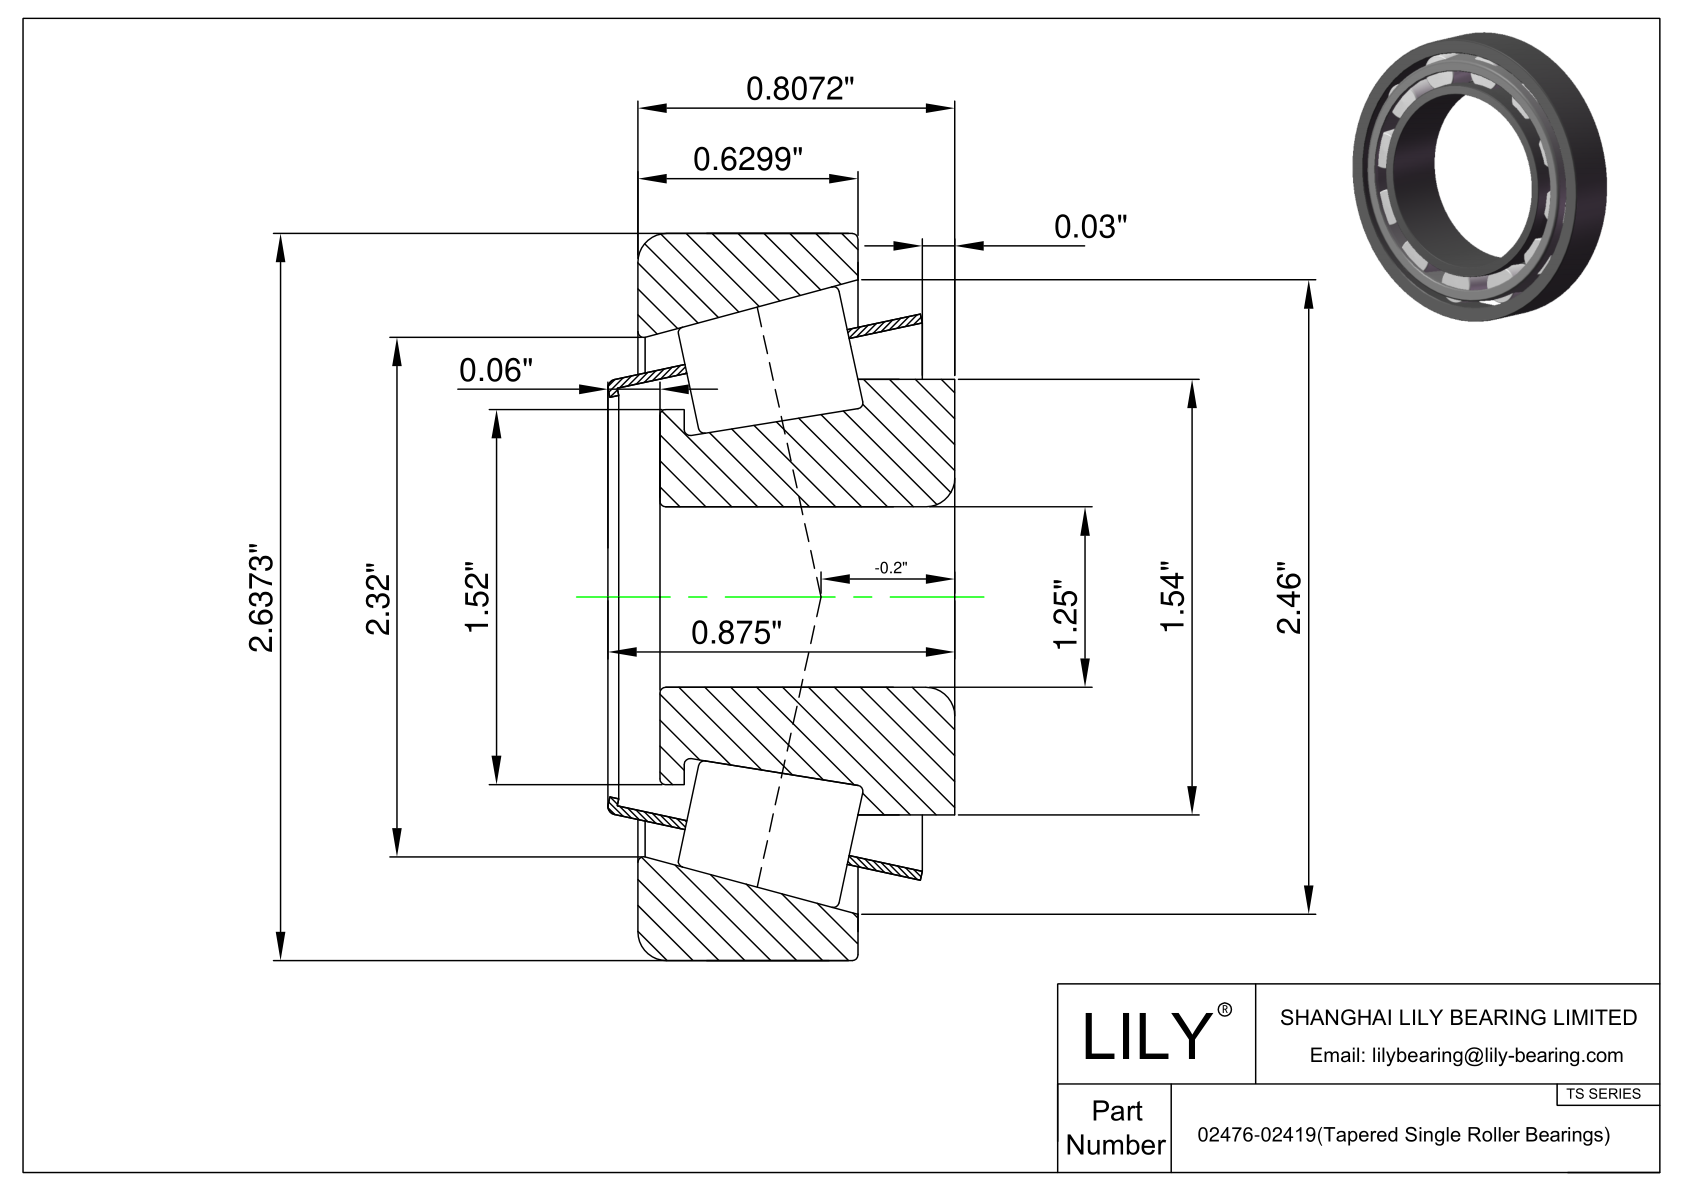 02476-02419 TS (Tapered Single Roller Bearings) (Imperial) cad drawing